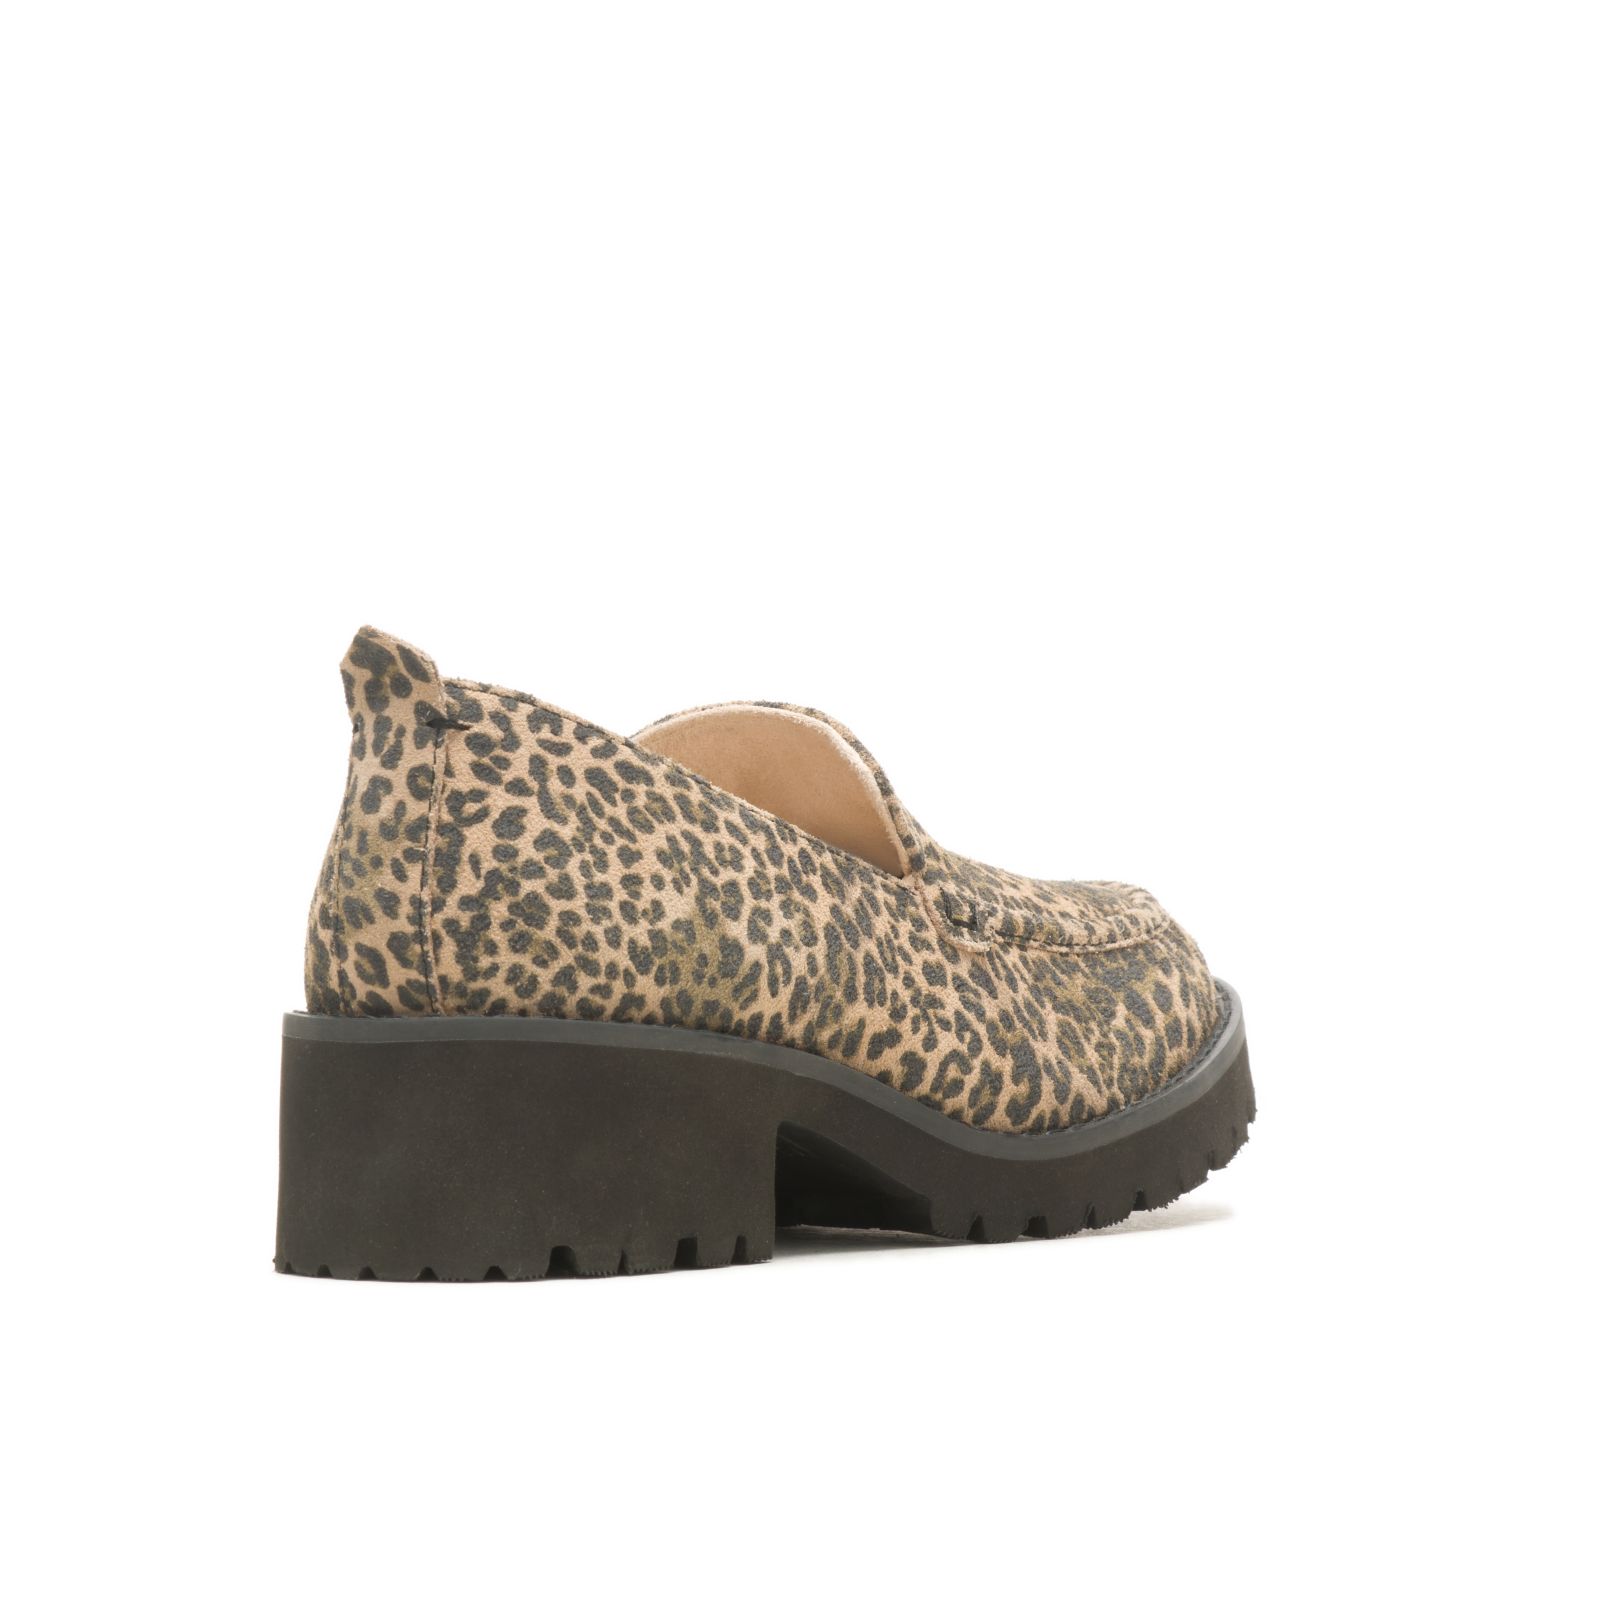 Loafers Hush Puppies Lucy Mujer Leopardo | MURAJCE-49